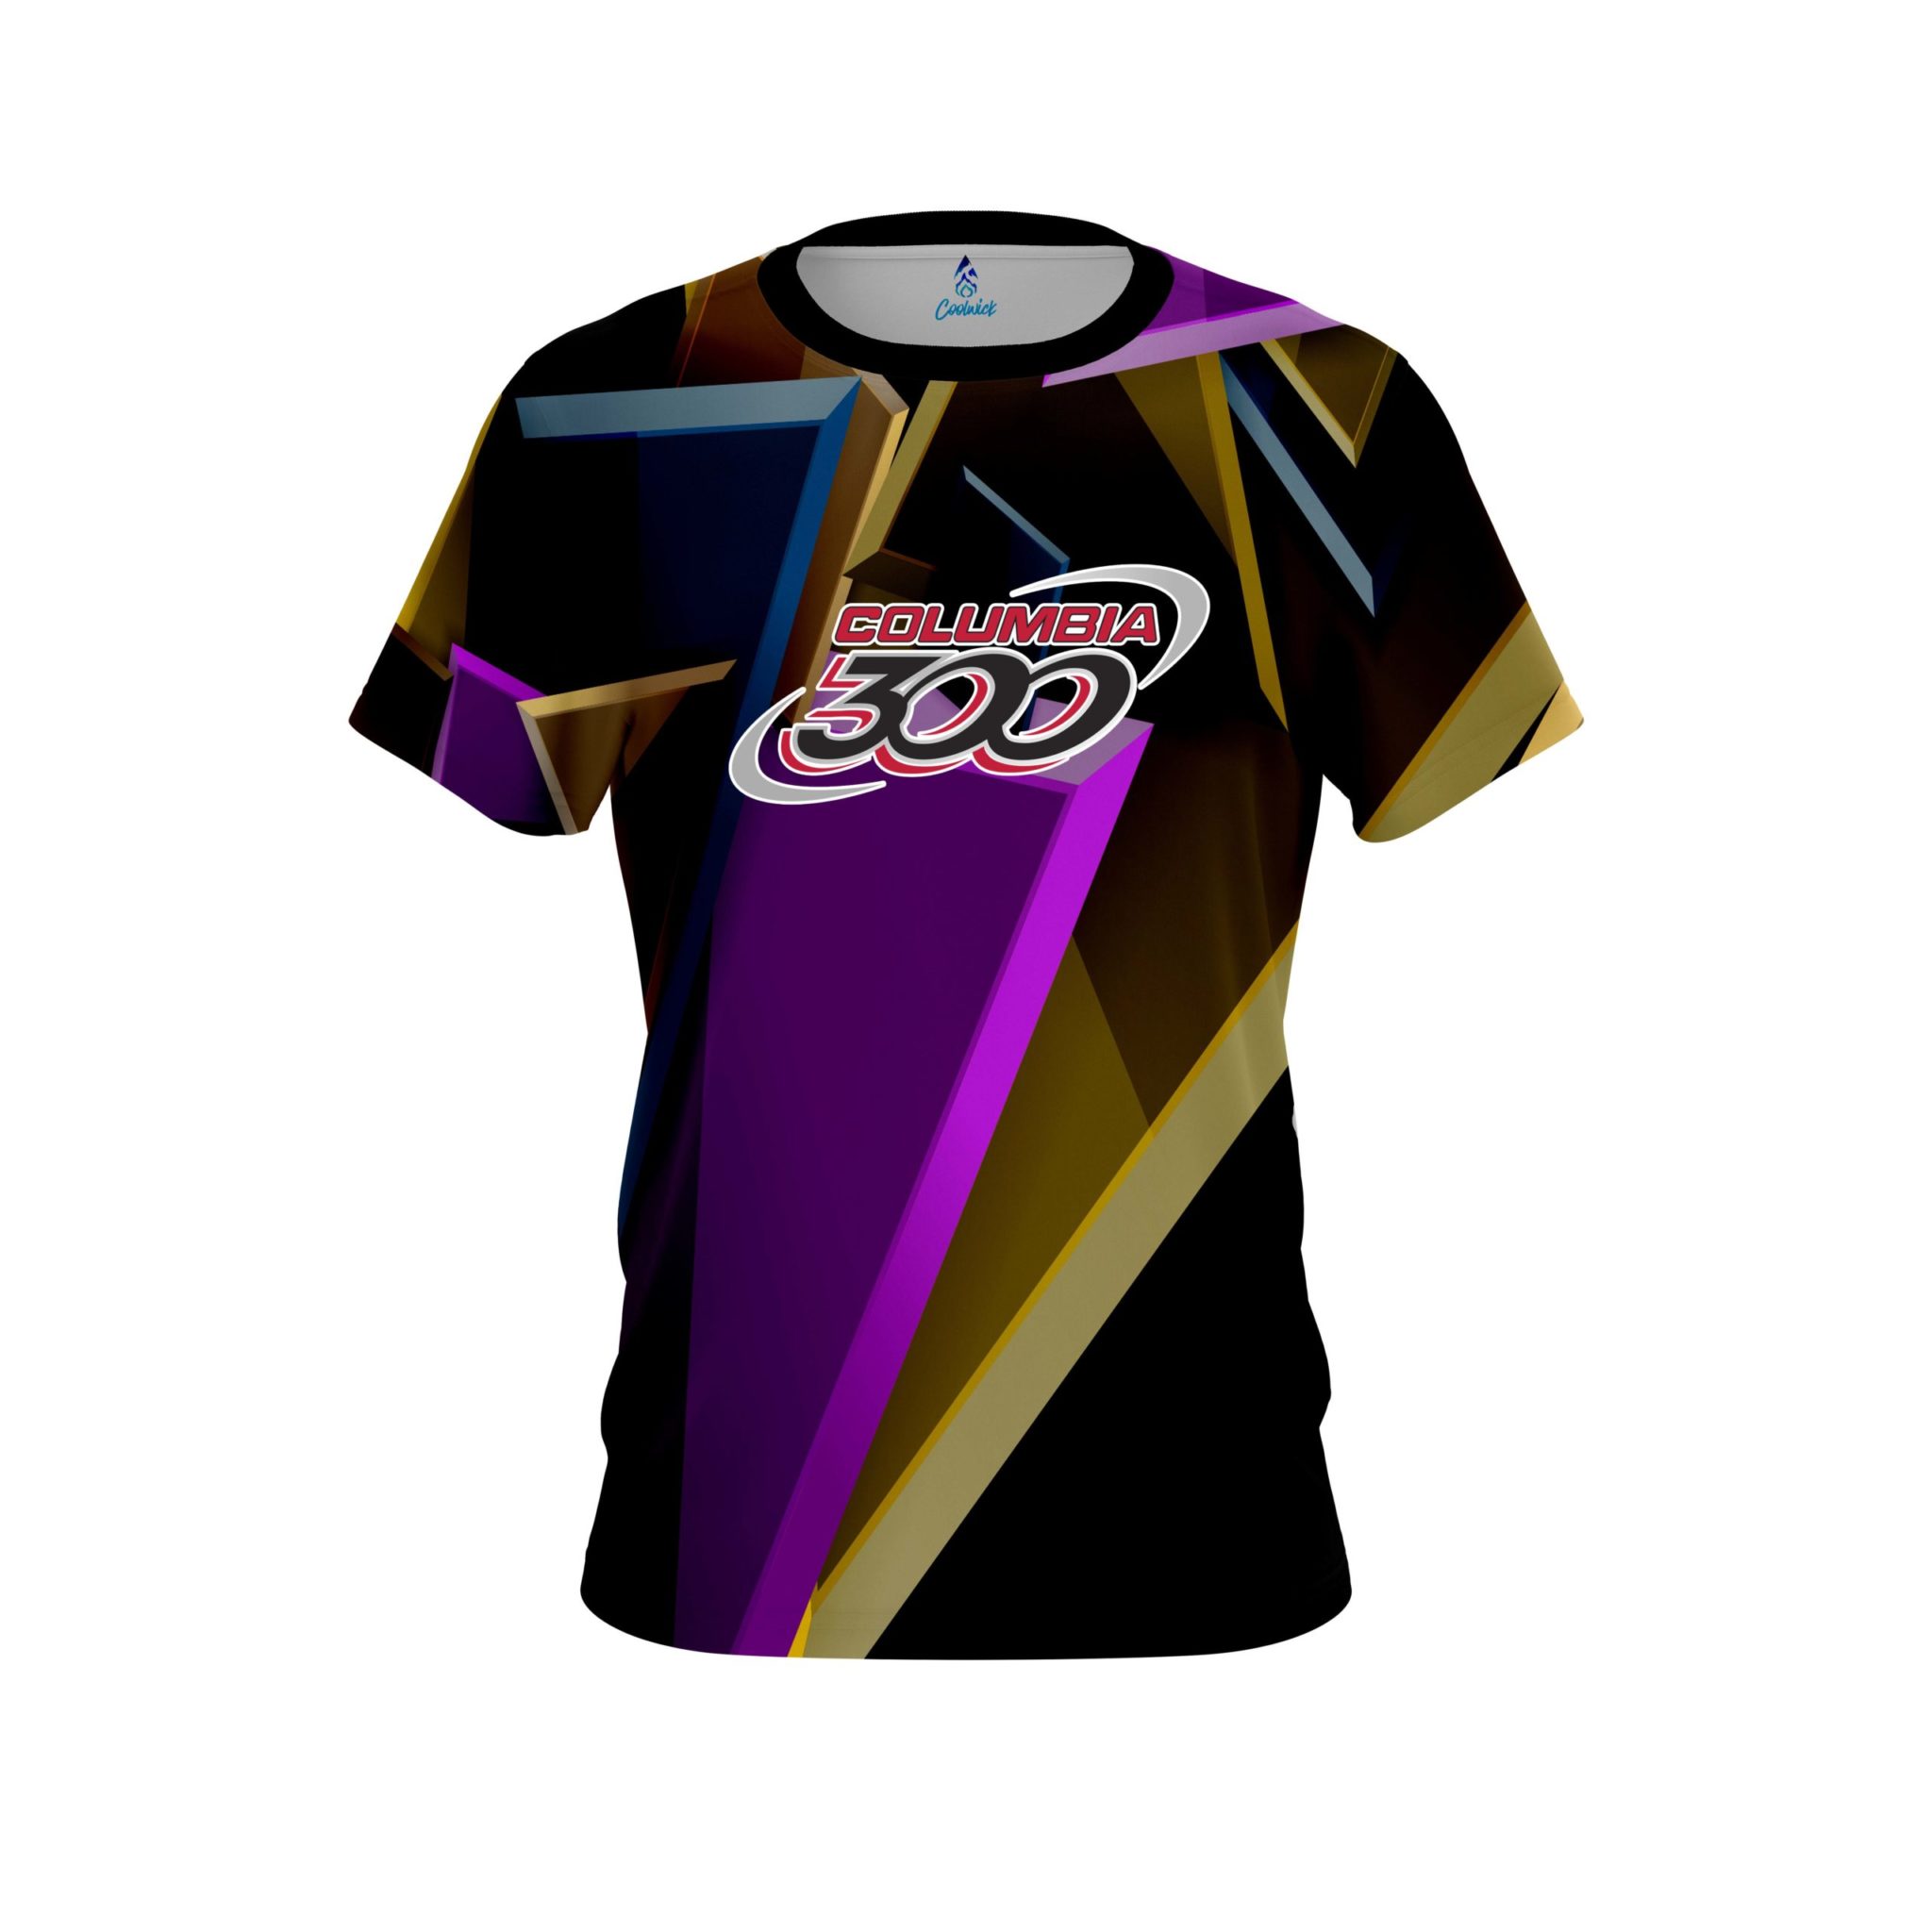 Columbia 300 Chalice CoolWick Bowling Jersey